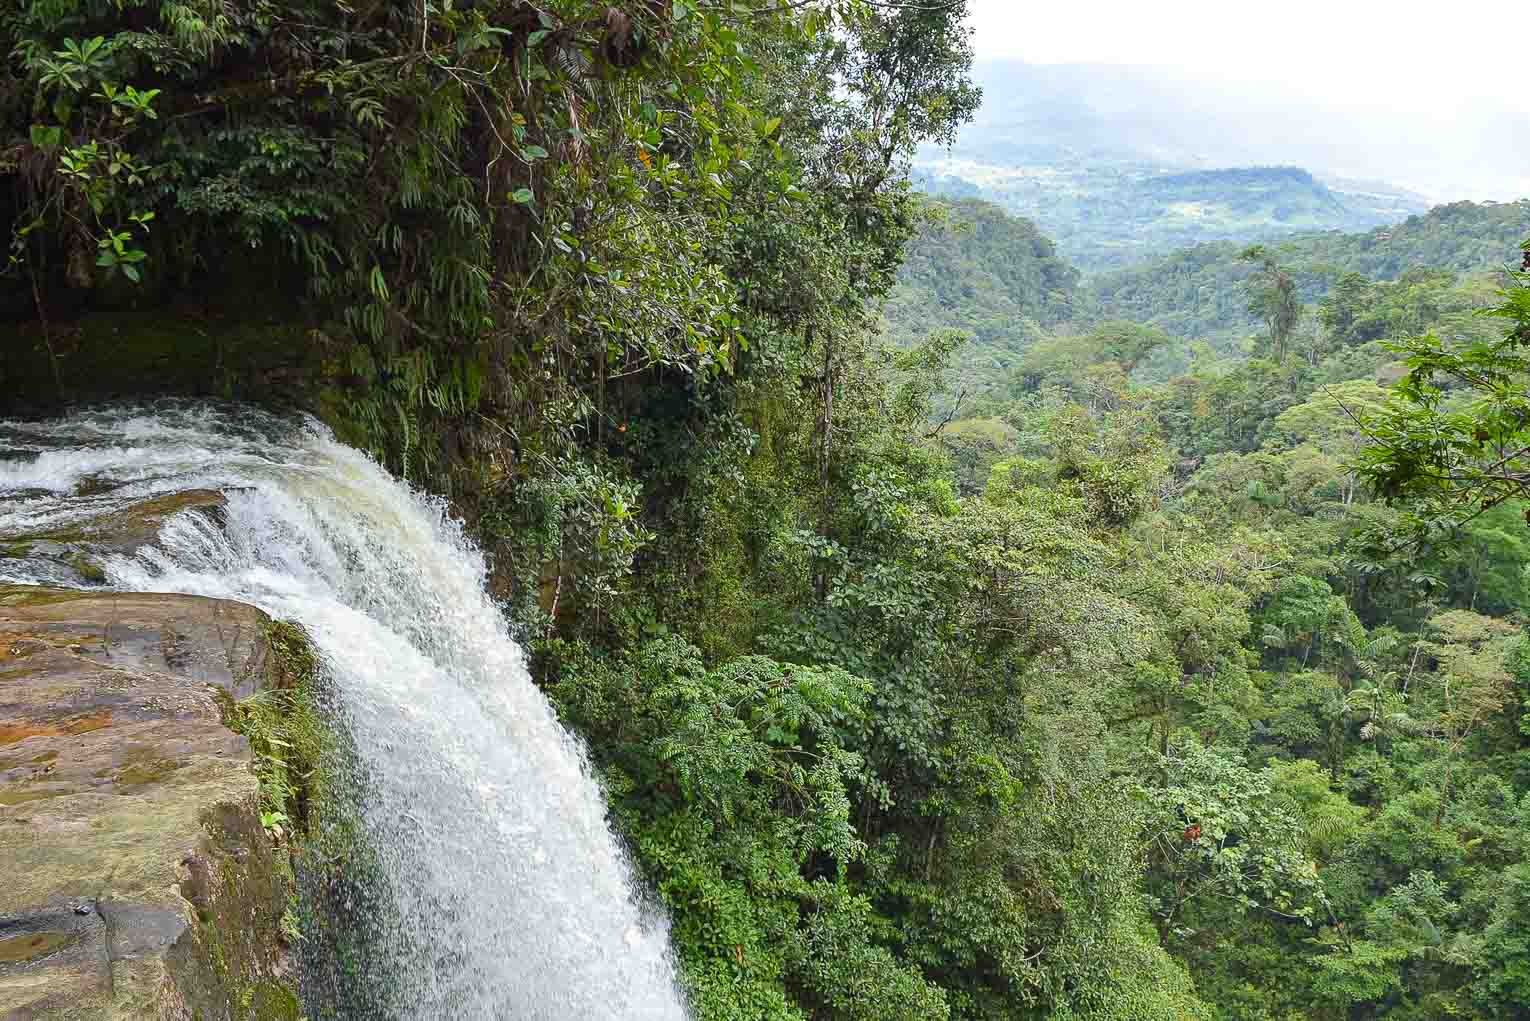 8 off-the-beaten-path destinations to discover in Colombia